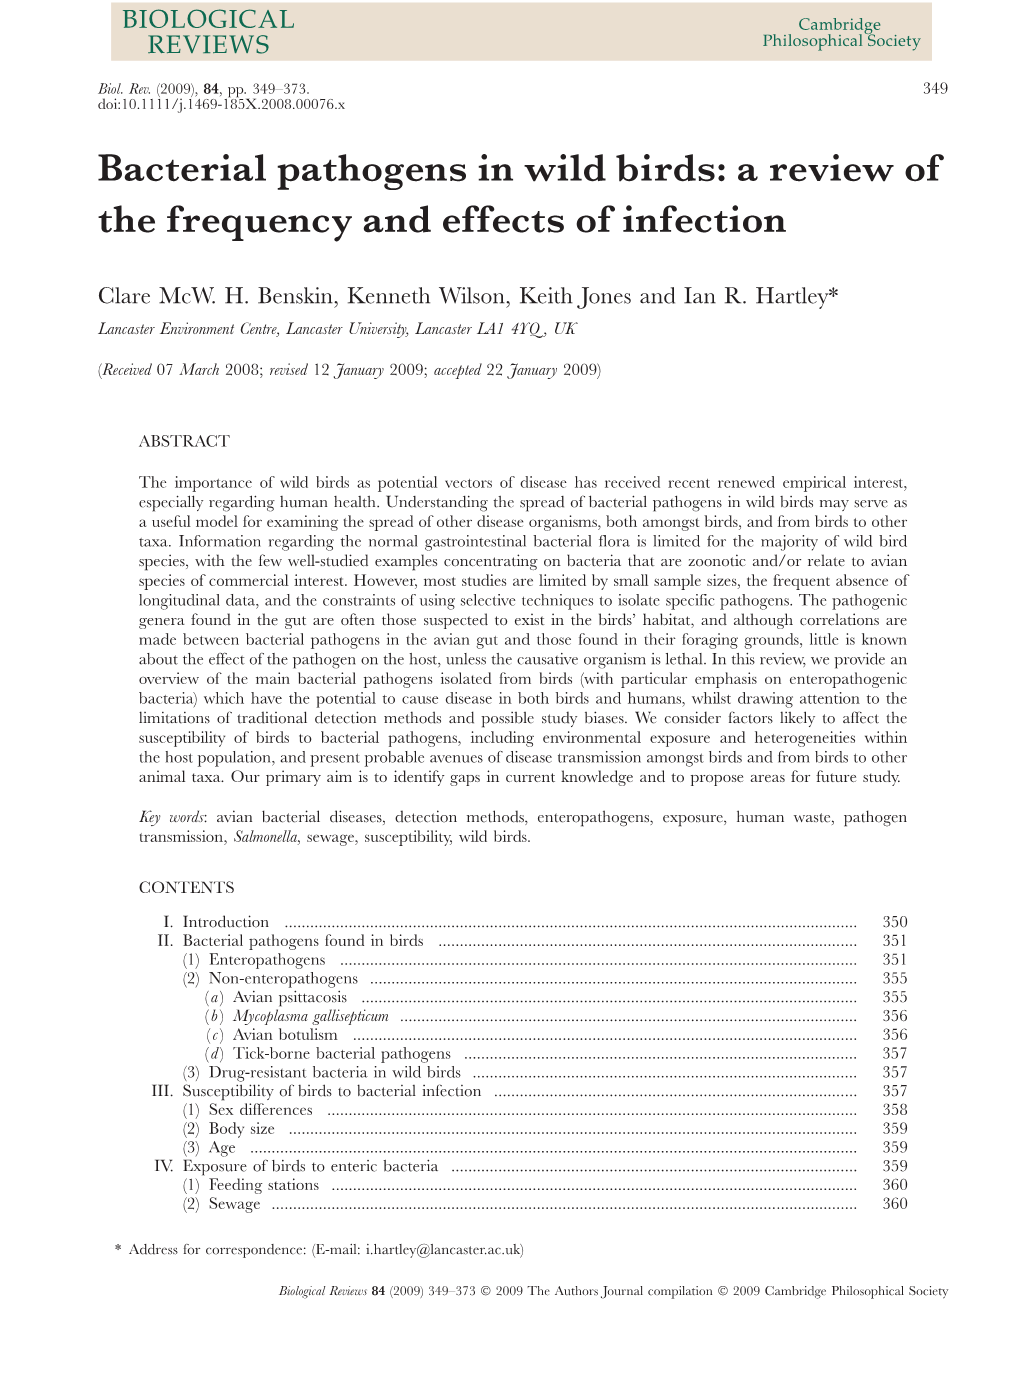 Bacterial Pathogens in Wild Birds: a Review of the Frequency and Effects of Infection